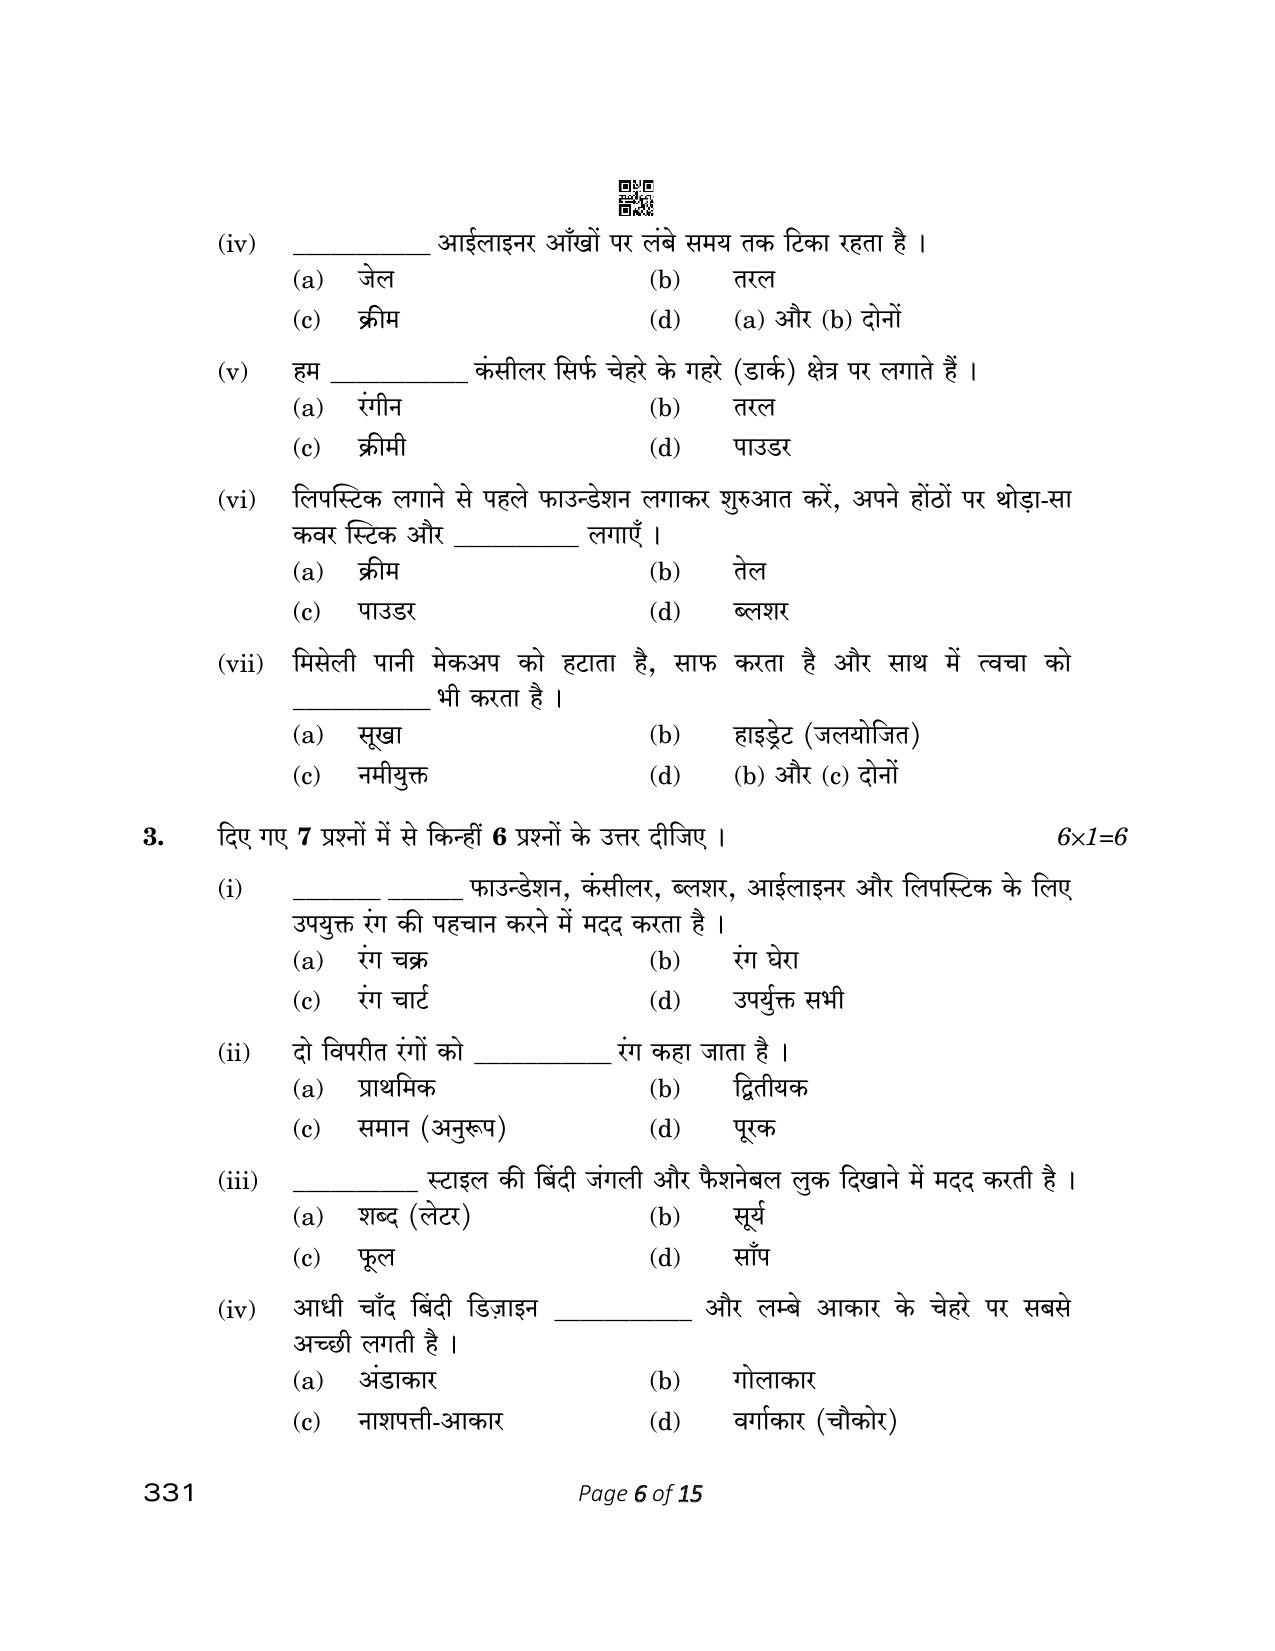 CBSE Class 12 331 Beauty And Wellness 2023 Question Paper - Page 6